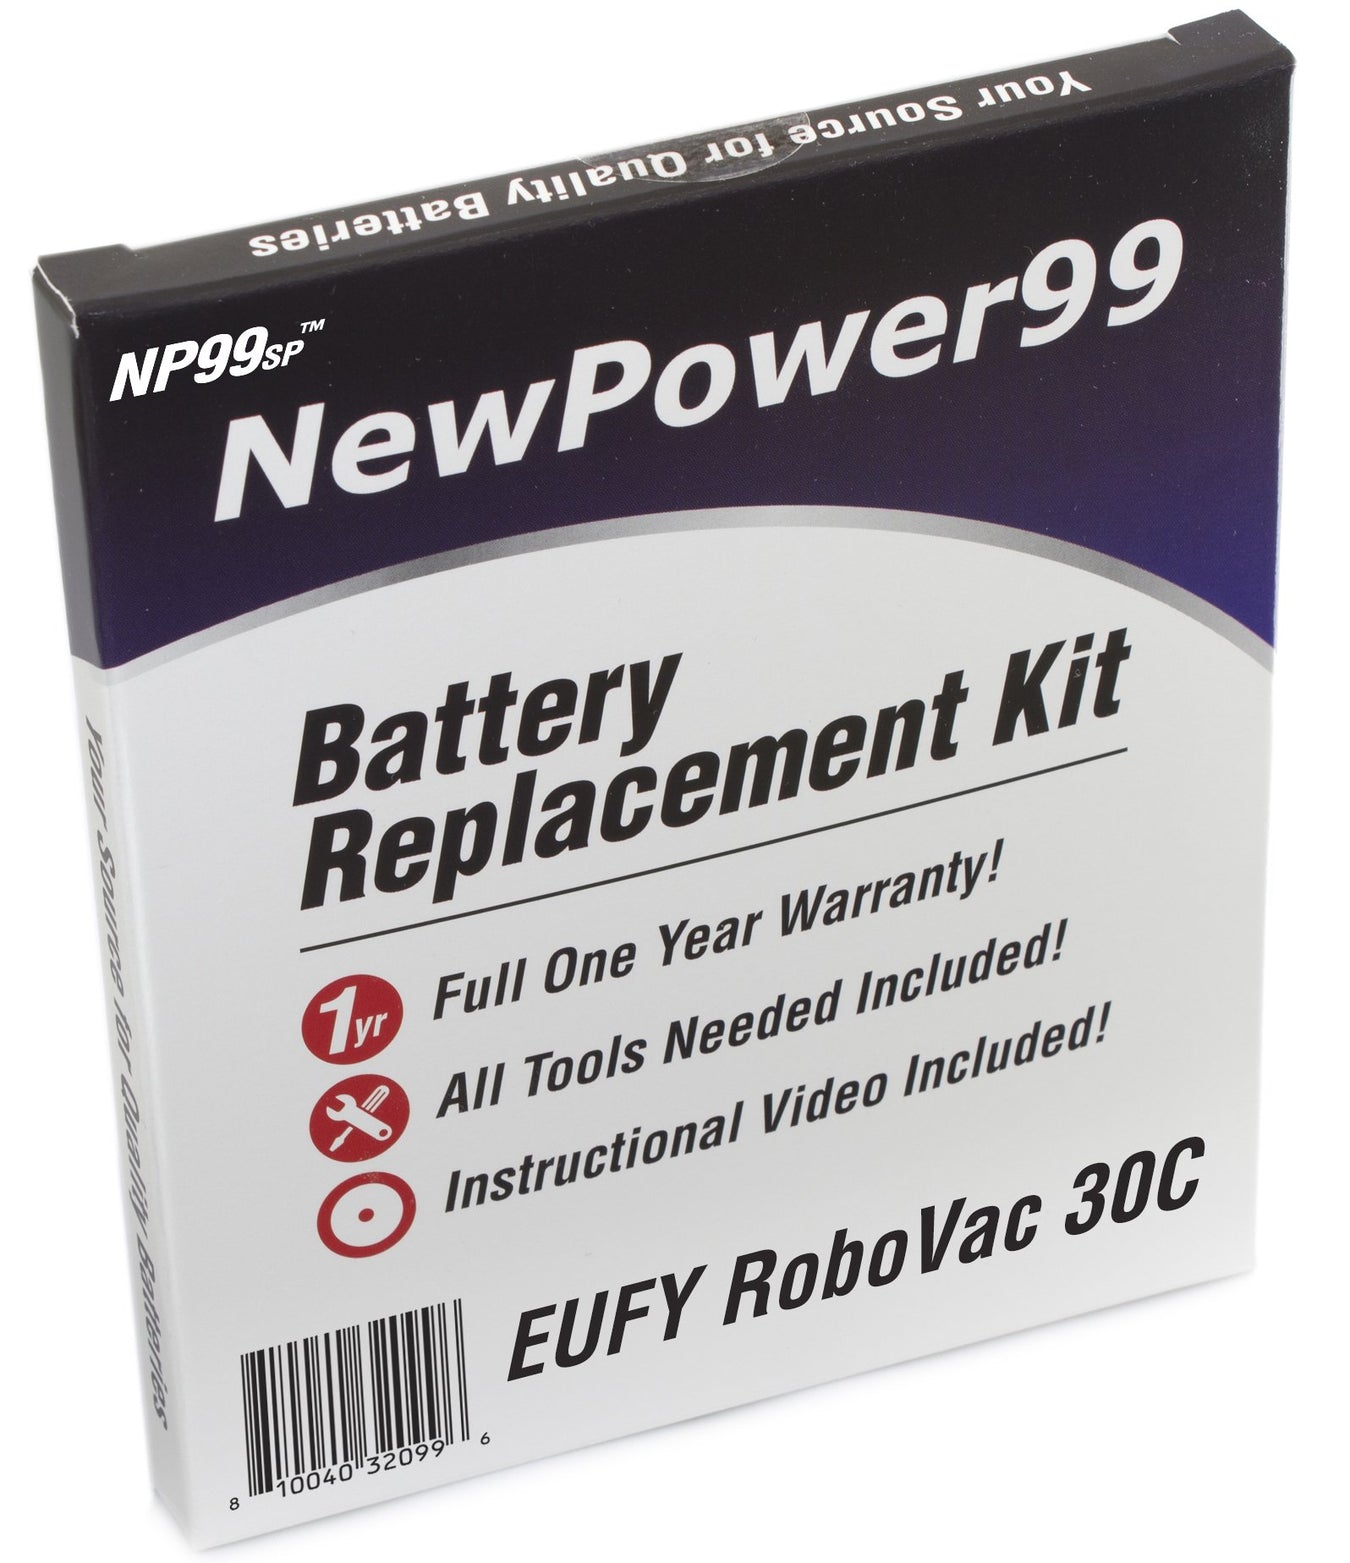 Battery Replacement Kits for Eufy